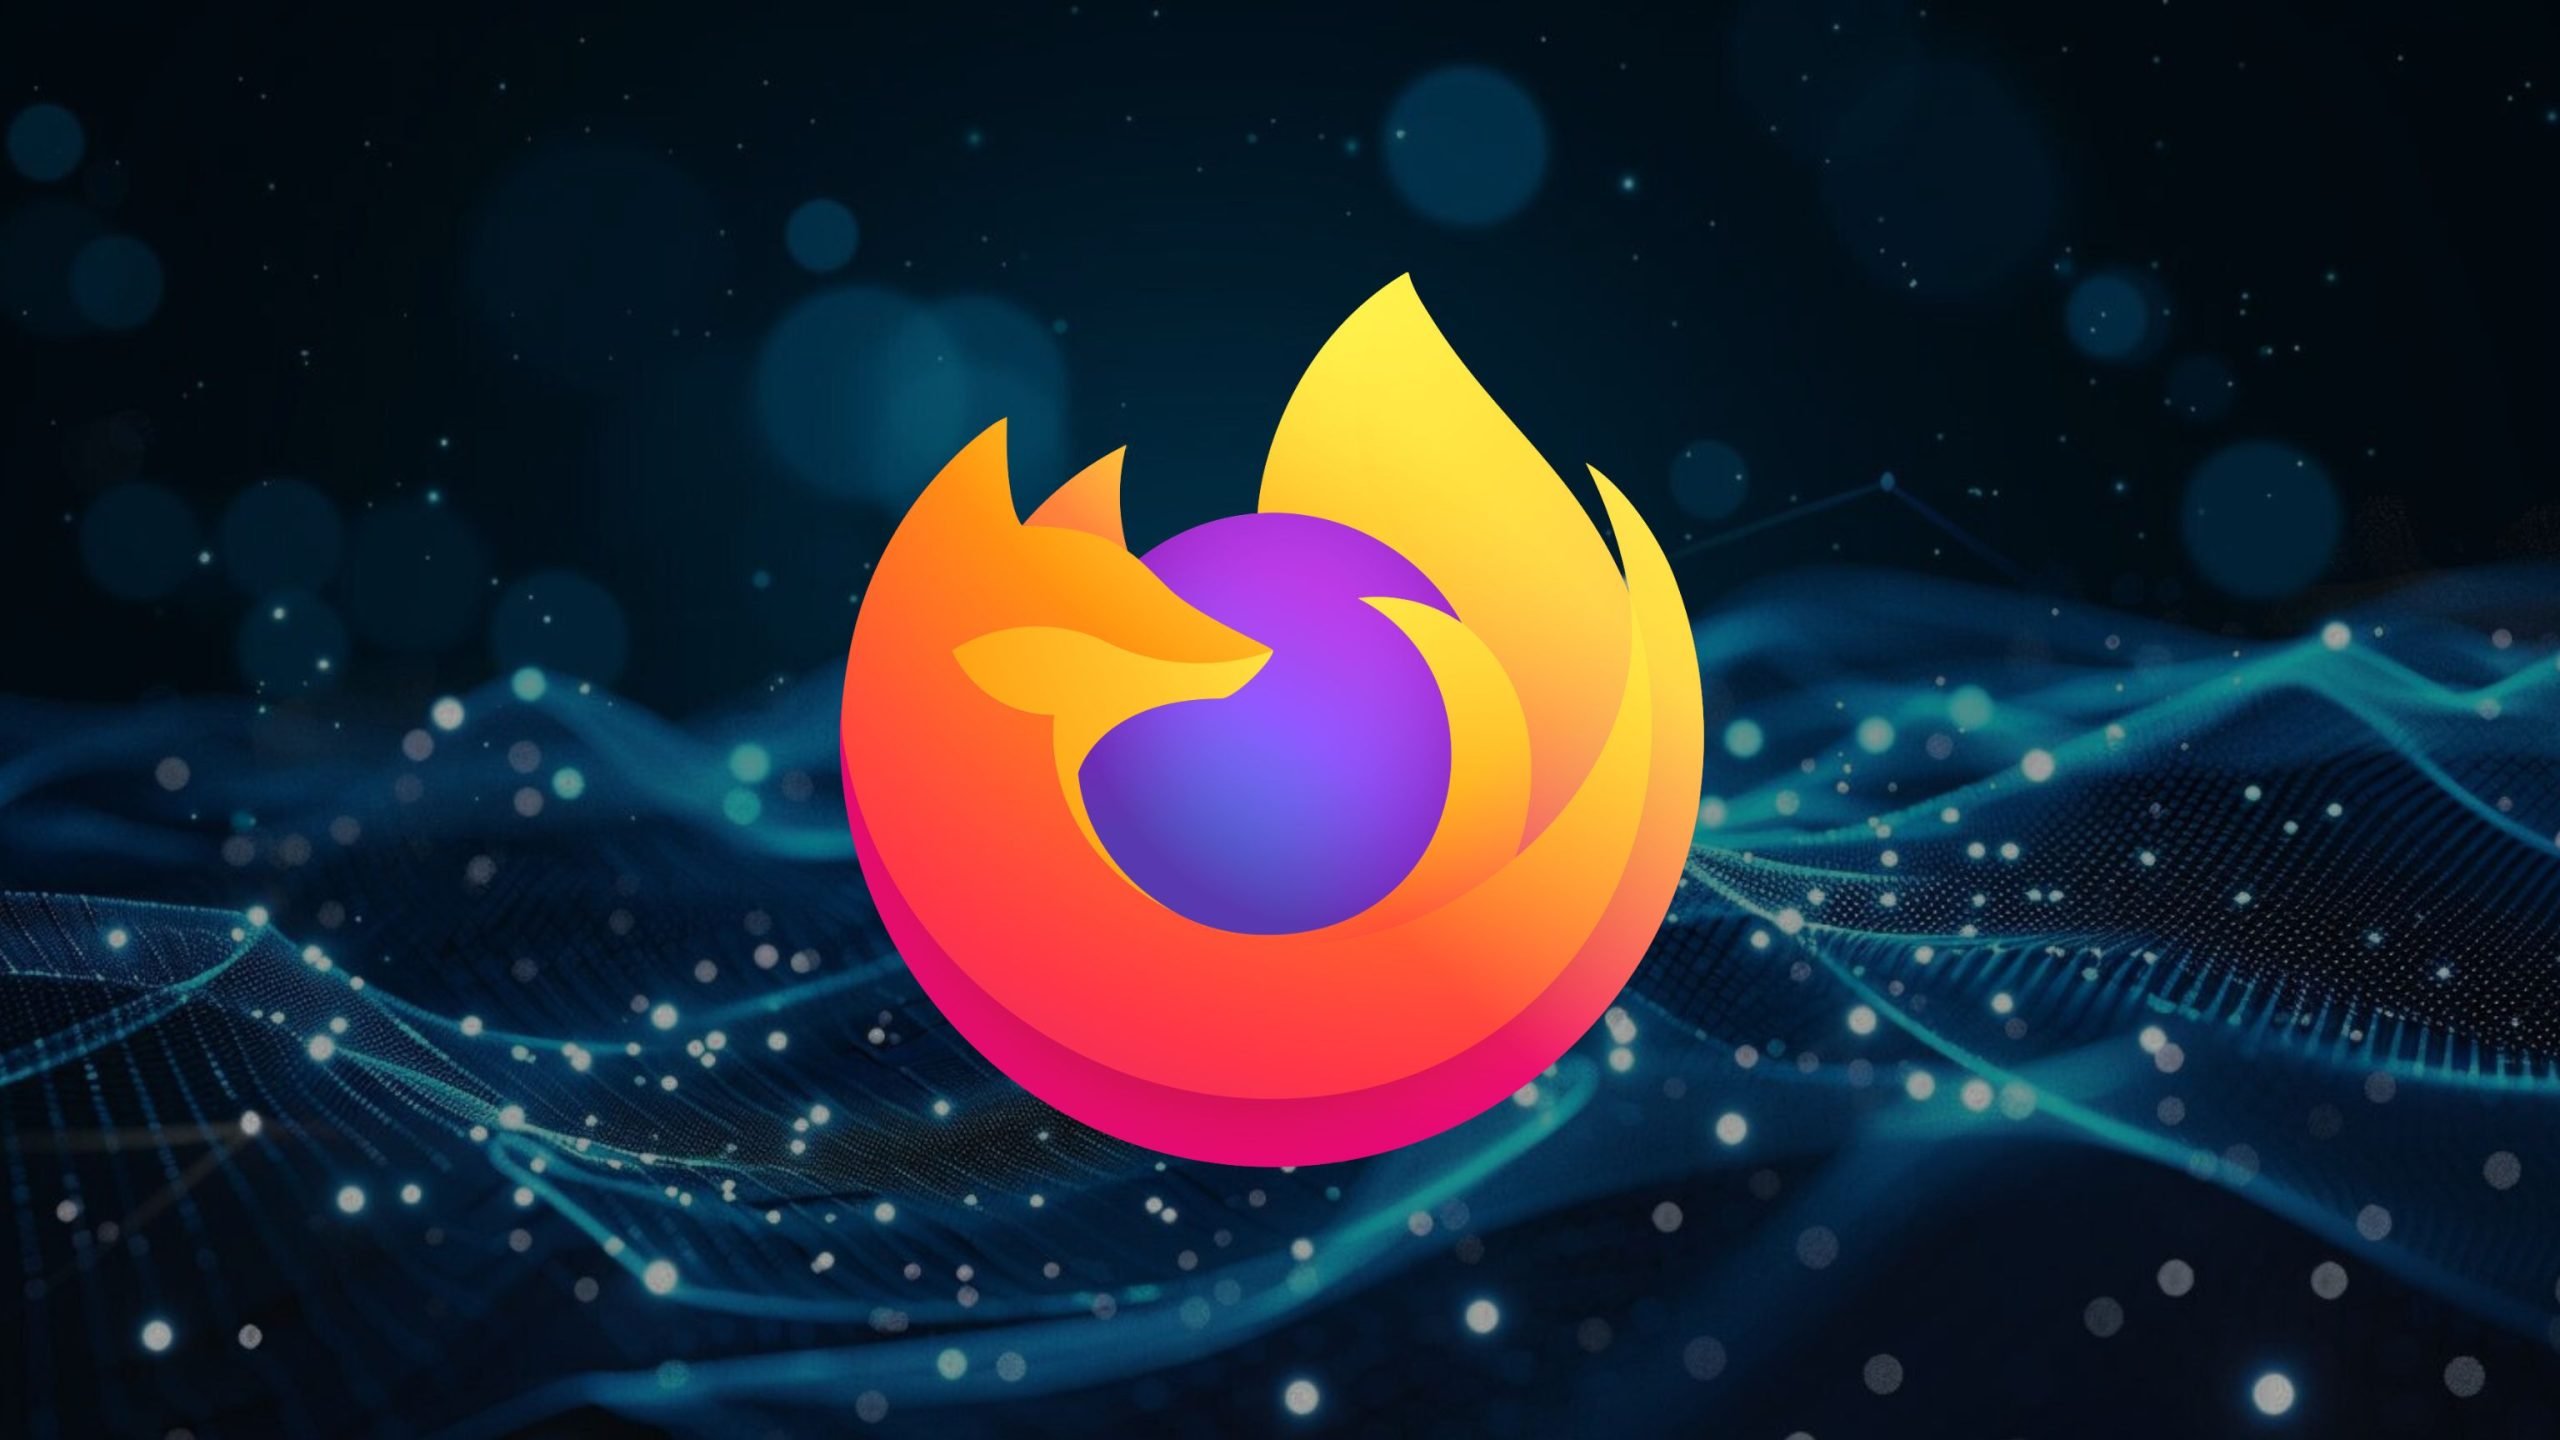 Firefox Faces Backlash Over New Data Collection For Advertisers